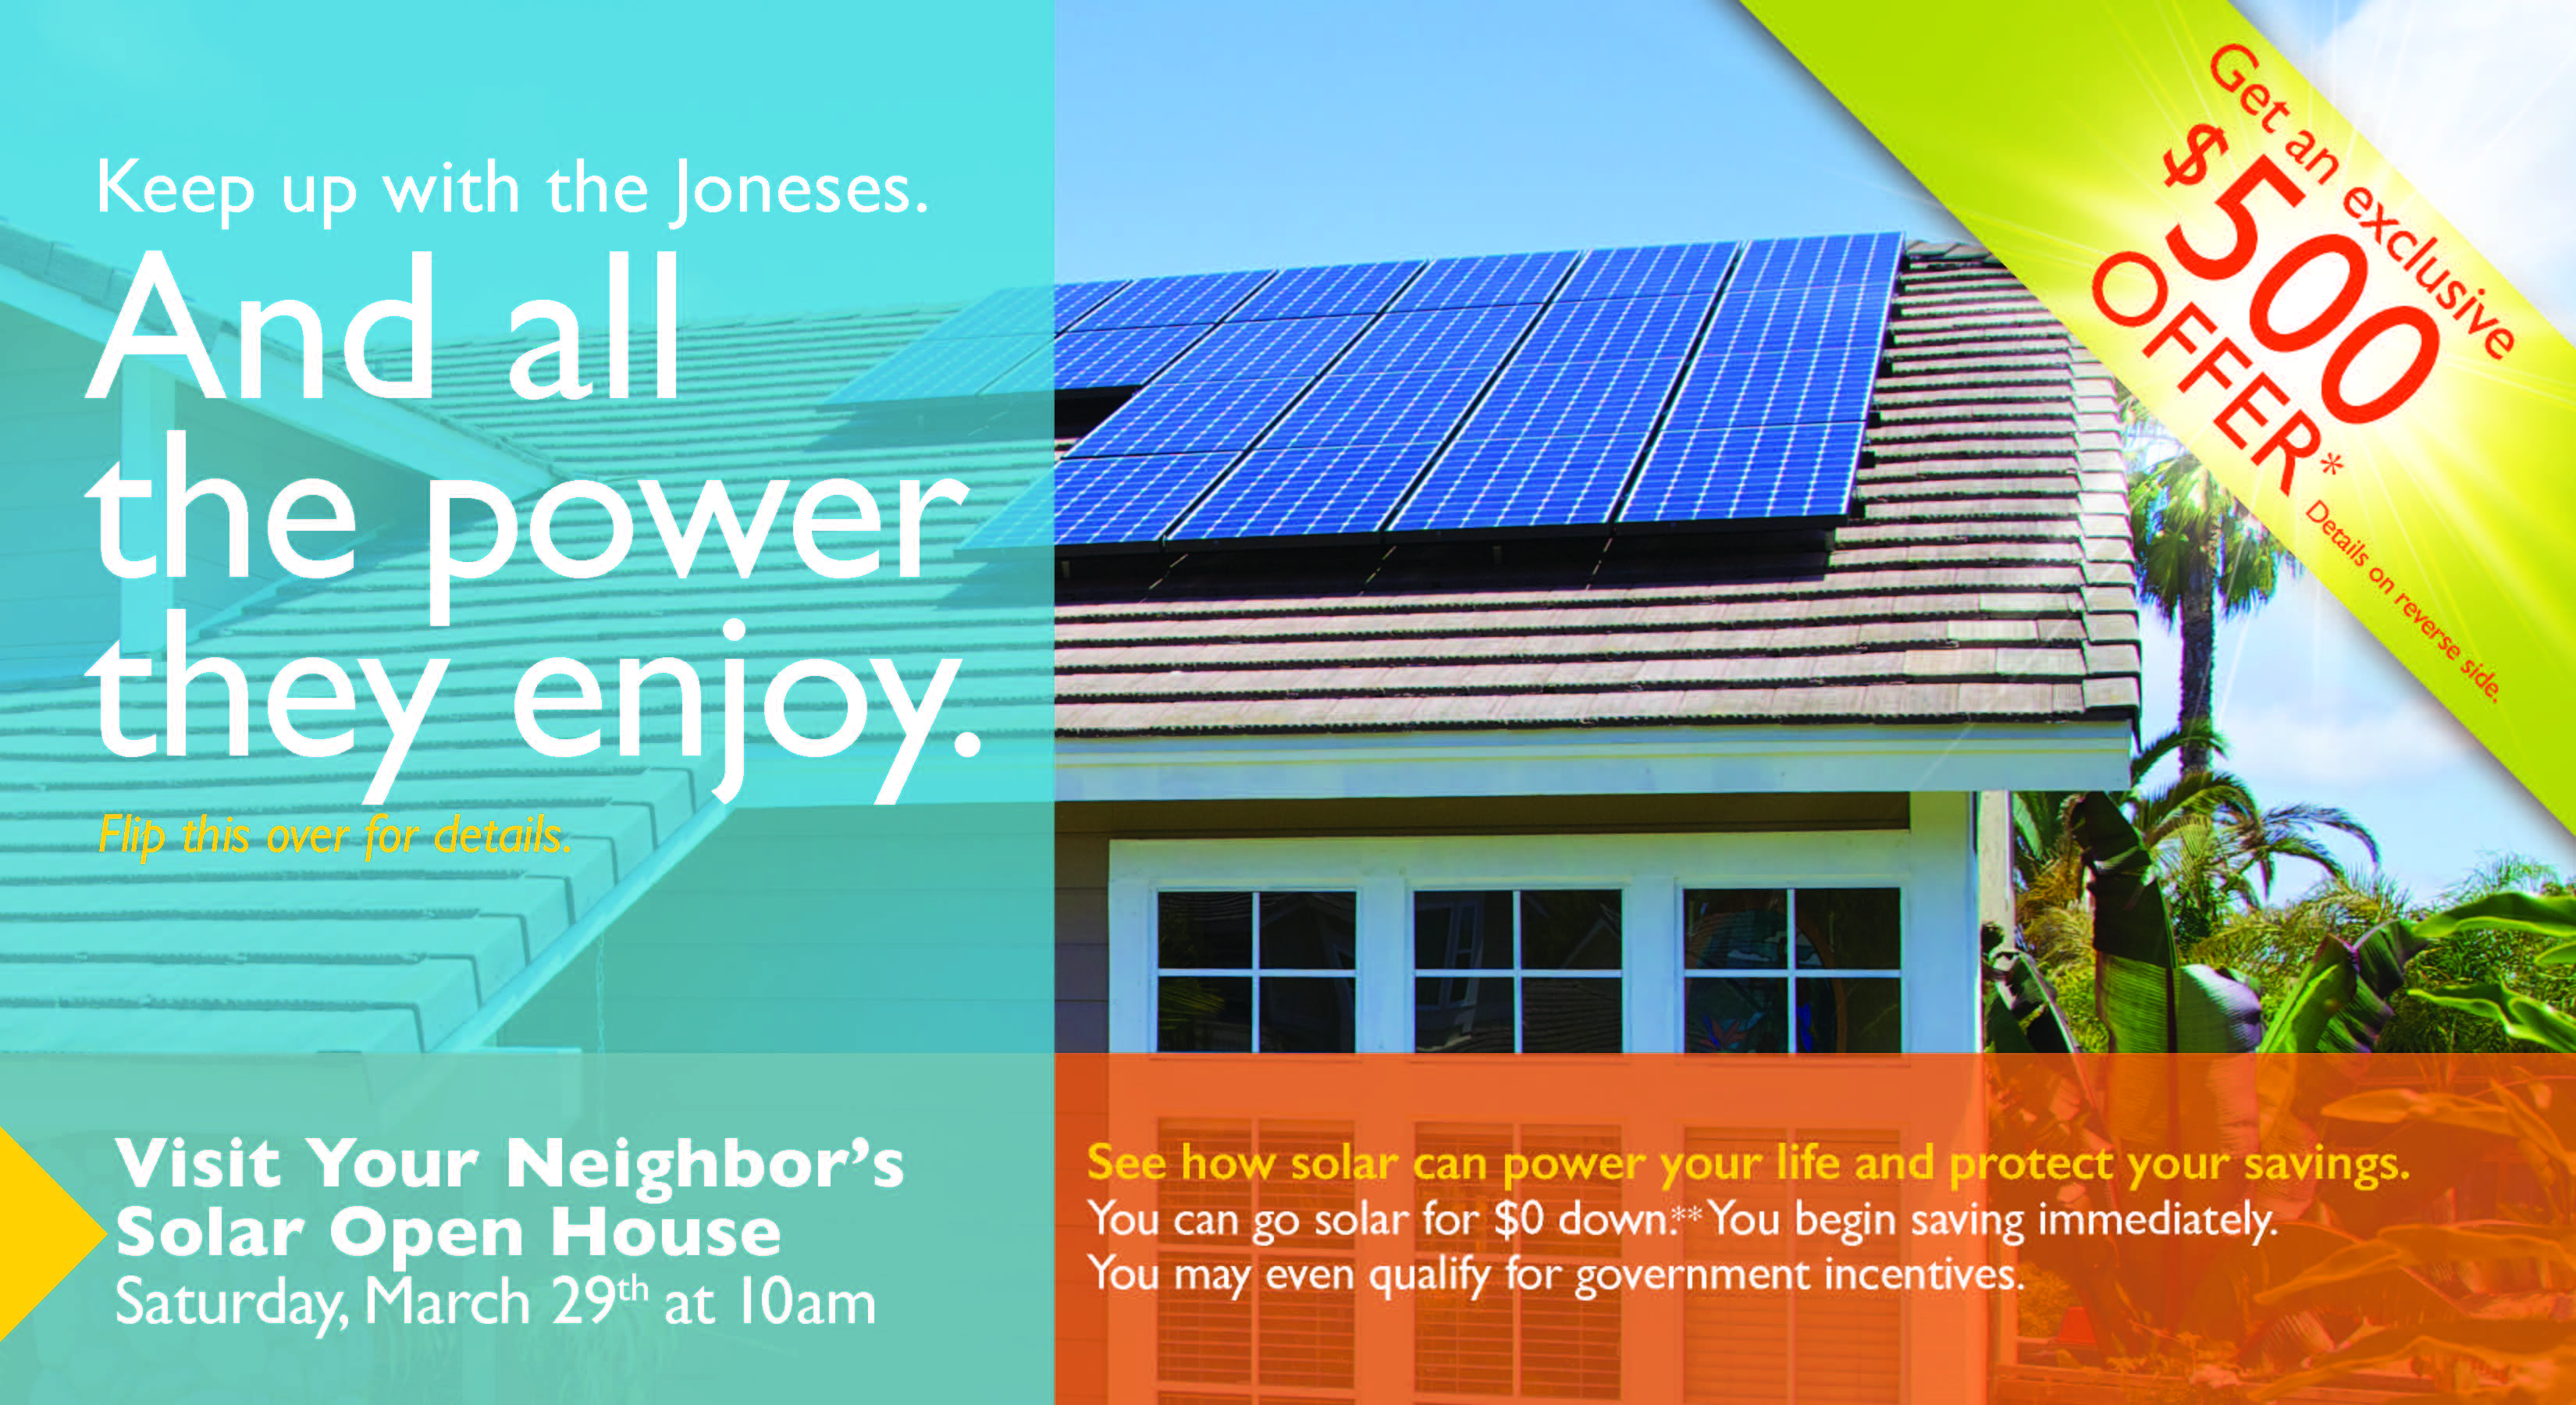 Visit Your Neighbor's Solar Open House Information